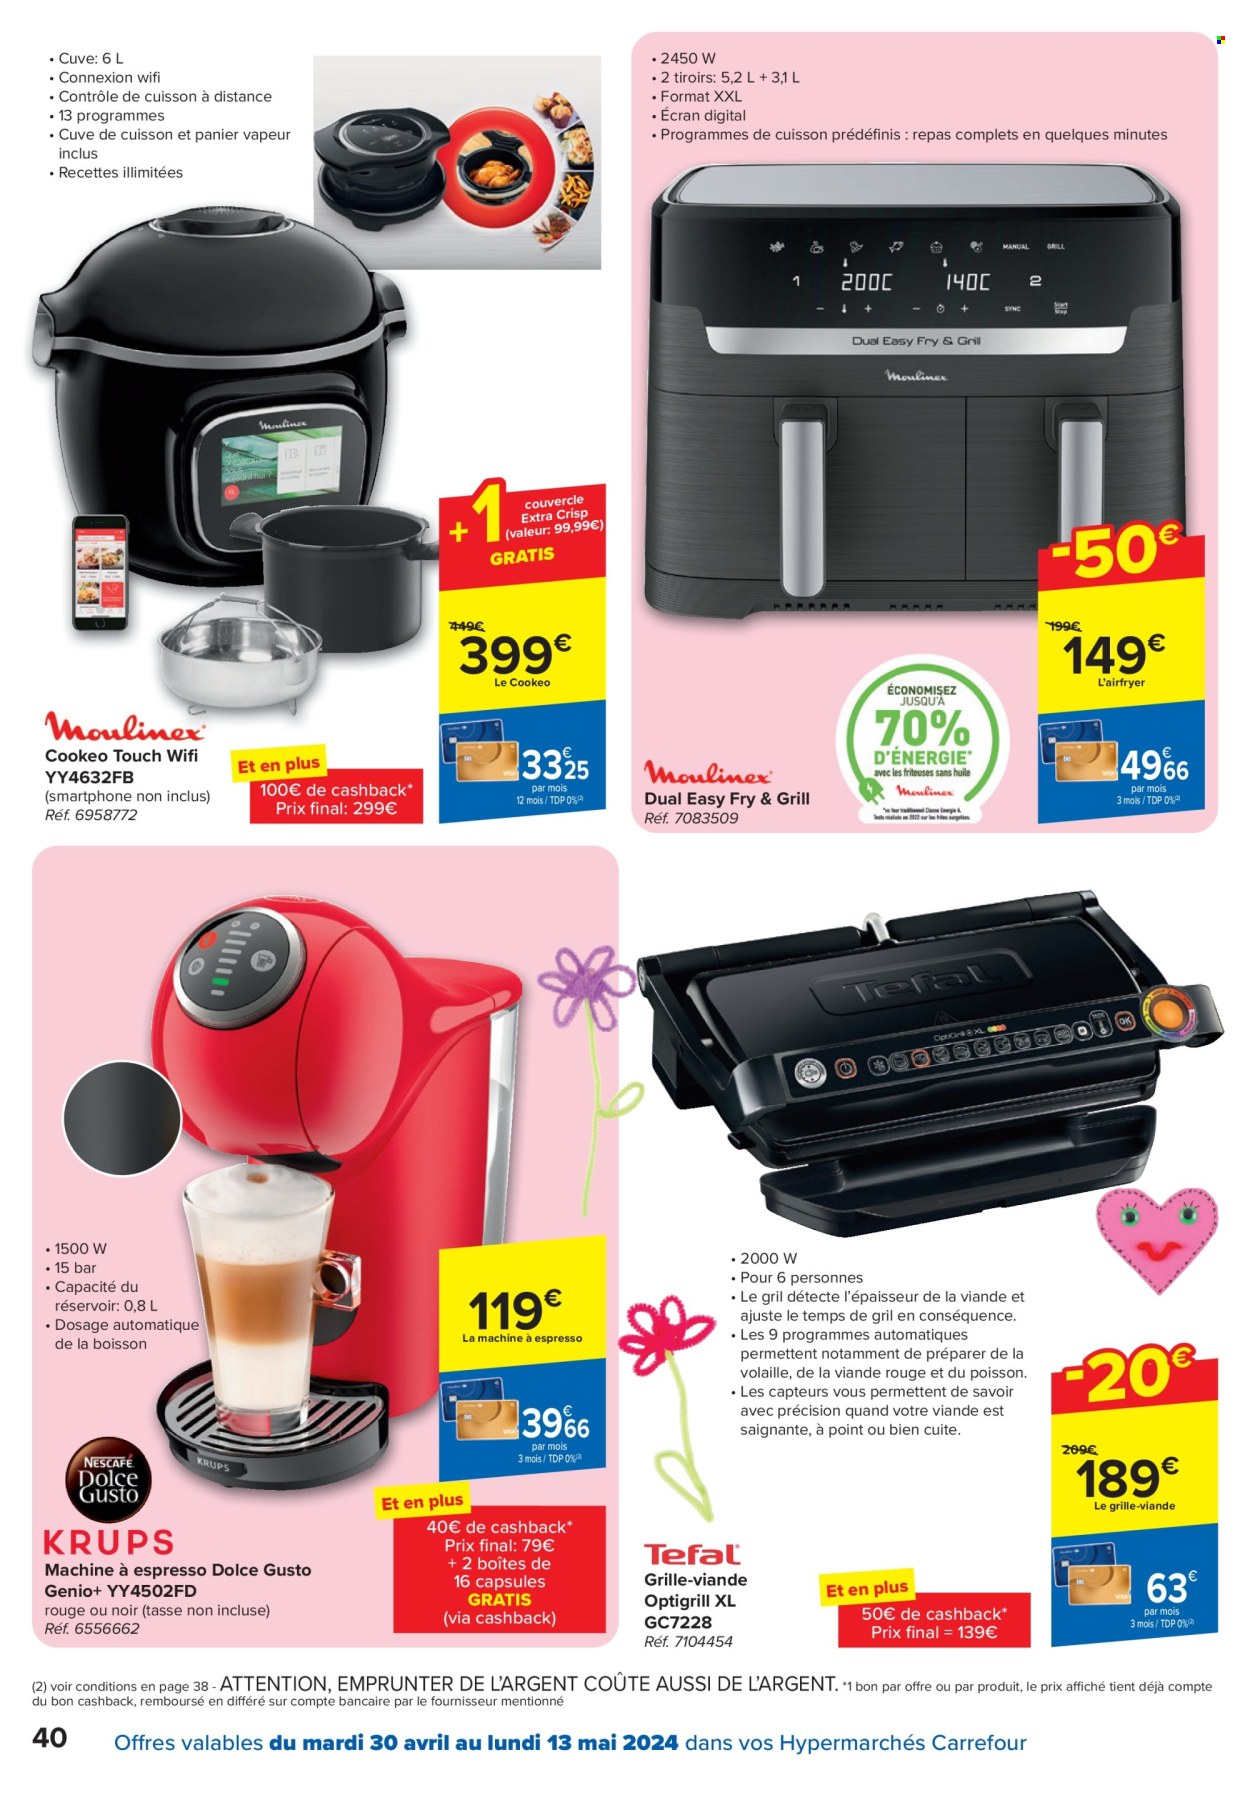 thumbnail - Carrefour hypermarkt-aanbieding - 30/04/2024 - 13/05/2024 -  producten in de aanbieding - Dolce Gusto, Espresso, smartphone, wifi, airfryer, Optigrill, contactgrill, grill. Pagina 40.